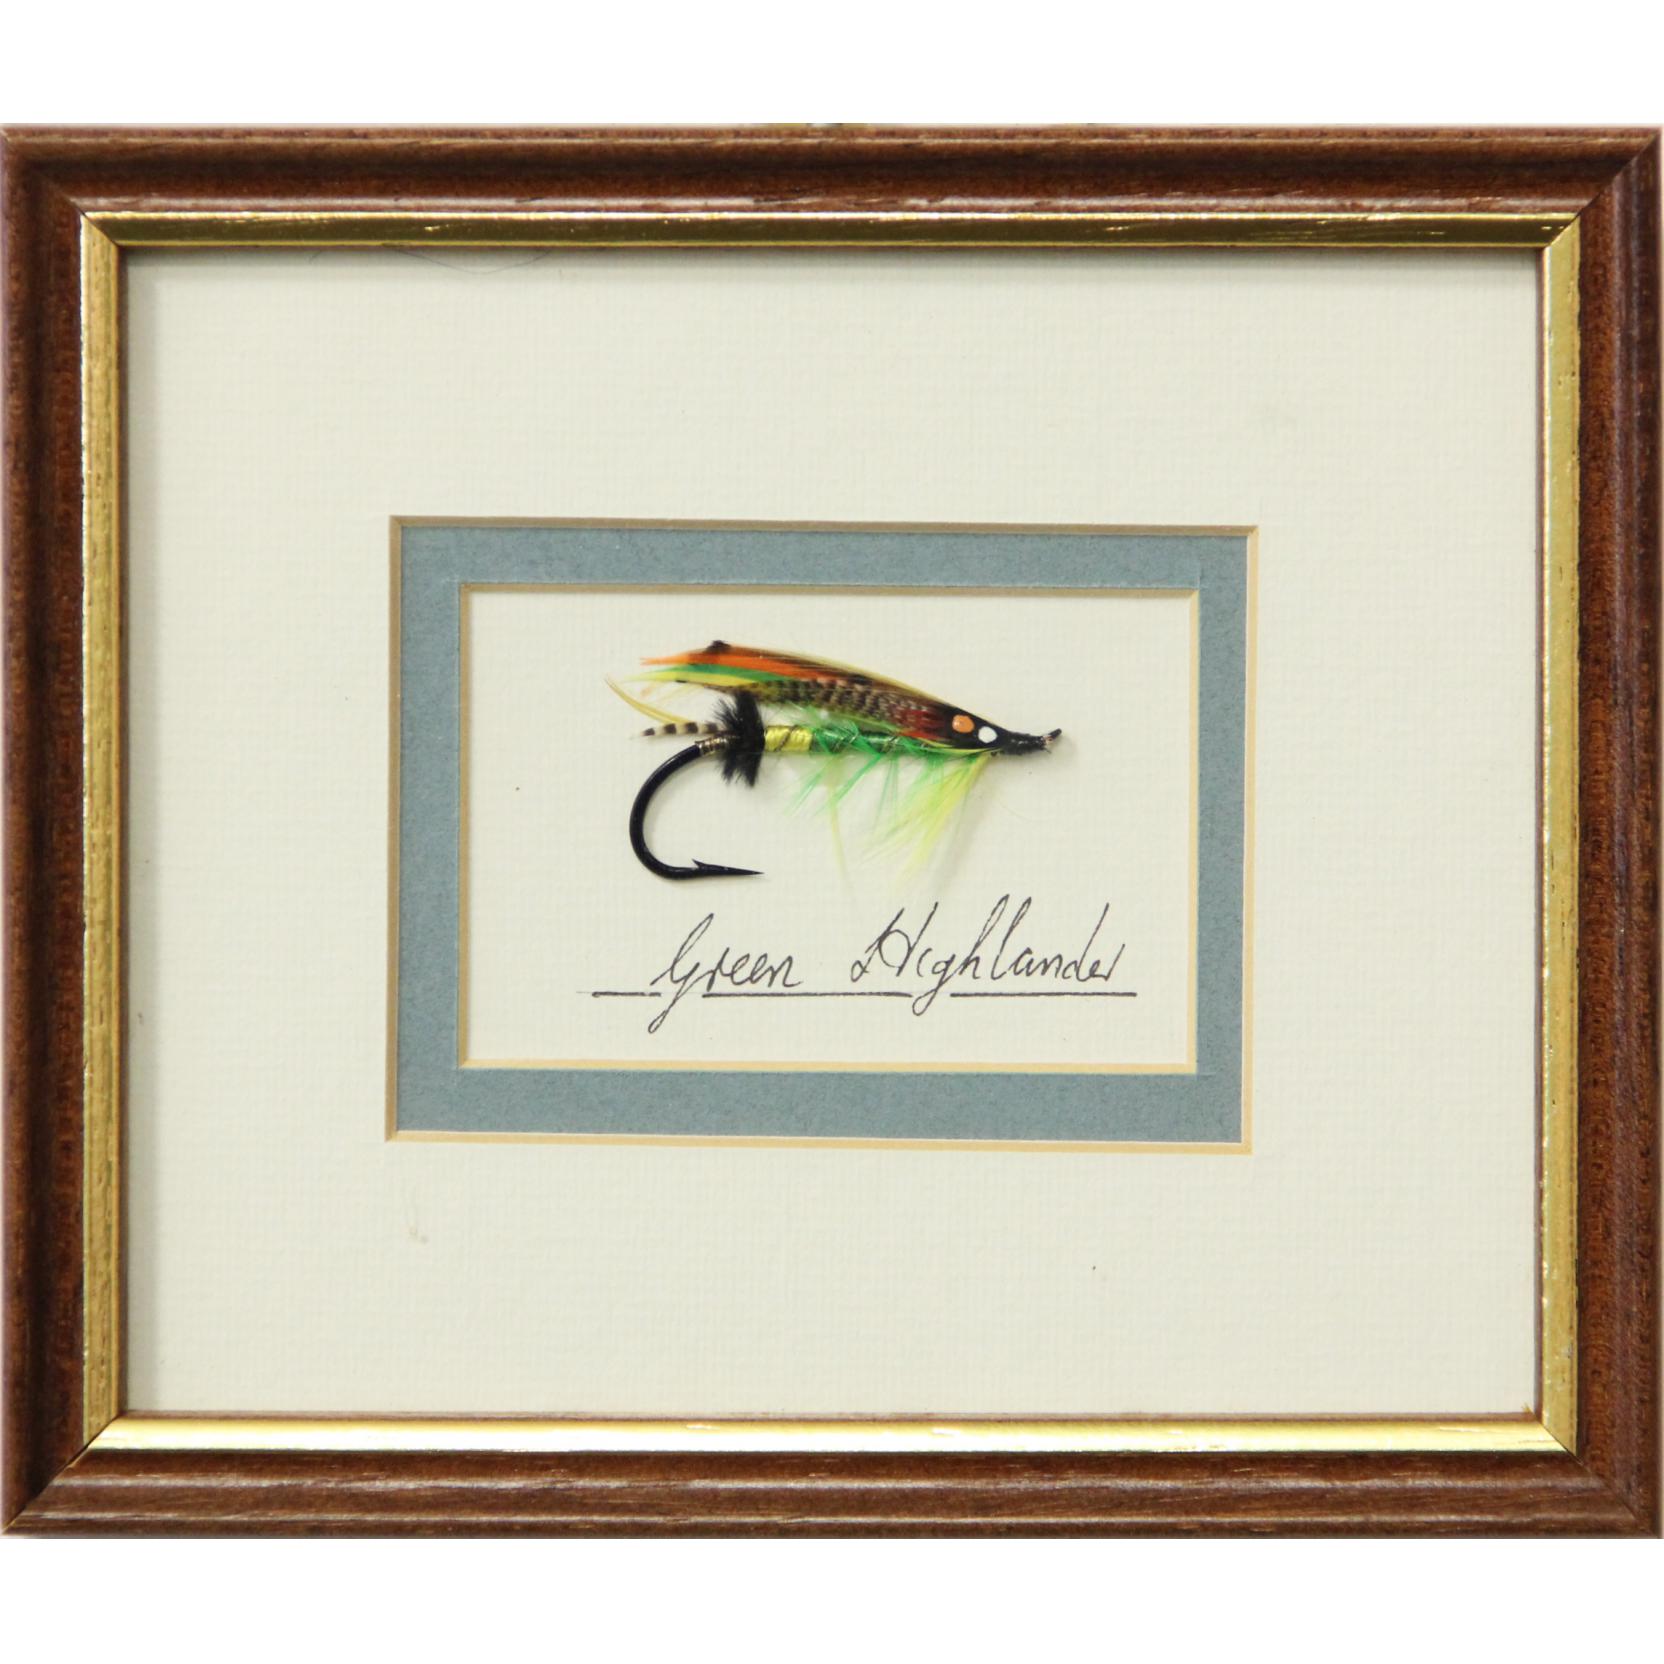 Seven Frame Collection of Mounted Fishing Flies (Lot 232 - The Winter  Catalogue AuctionDec 6, 2013, 10:00am)